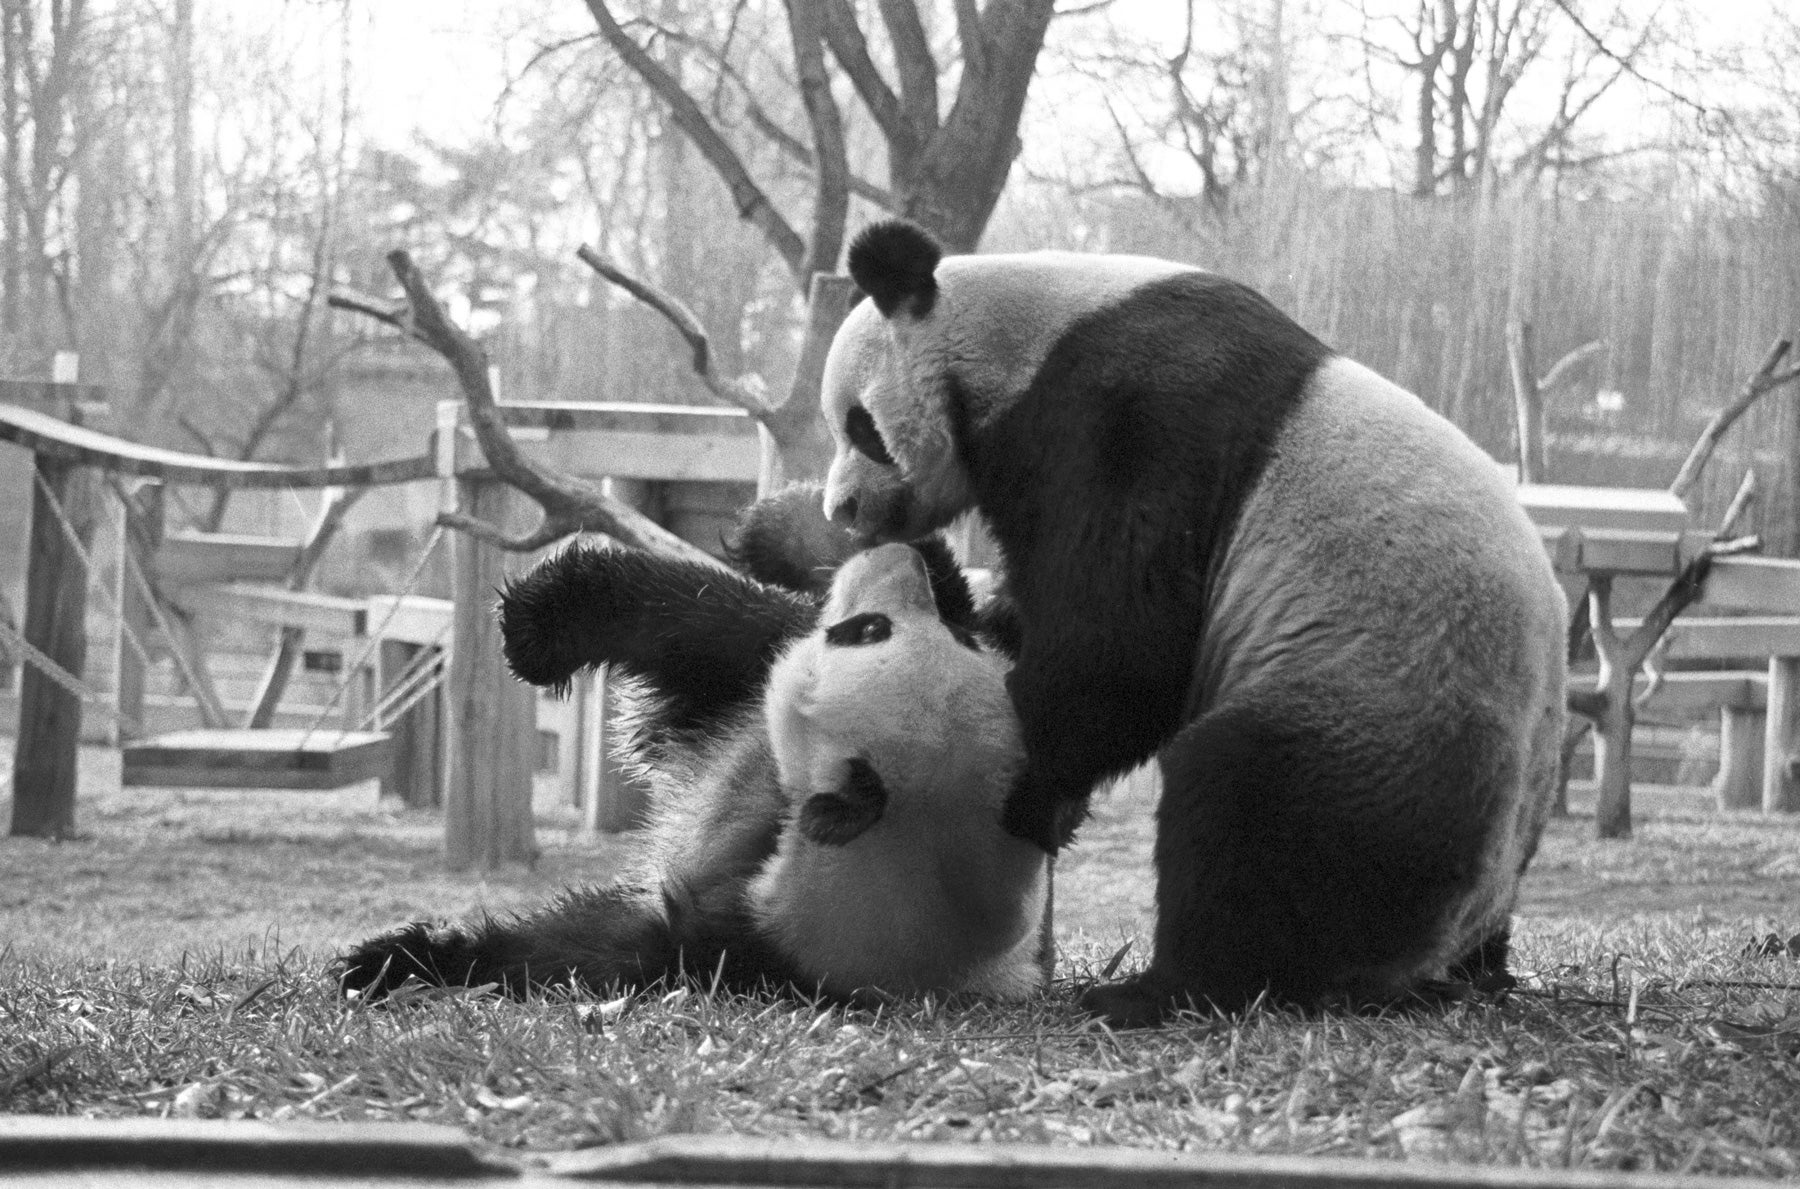 A black-and-white photo of giant pandas Ling Ling and Hsing Hsing from their arrival at the Smithsonian's National Zoo